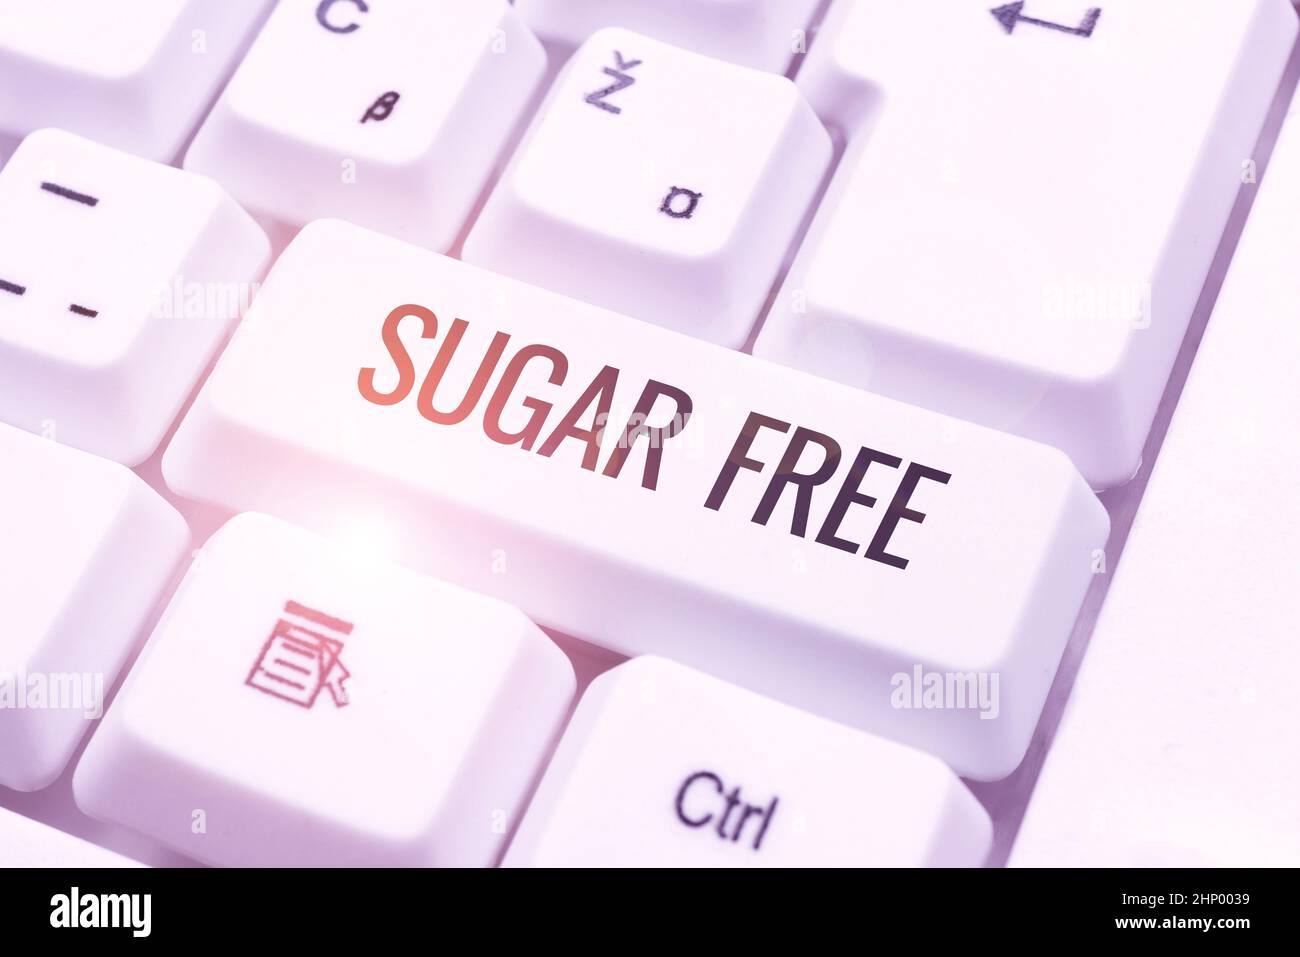 Writing displaying text Sugar Free, Internet Concept containing an artificial sweetening substance instead of sugar Creating Online Chat Platform Prog Stock Photo